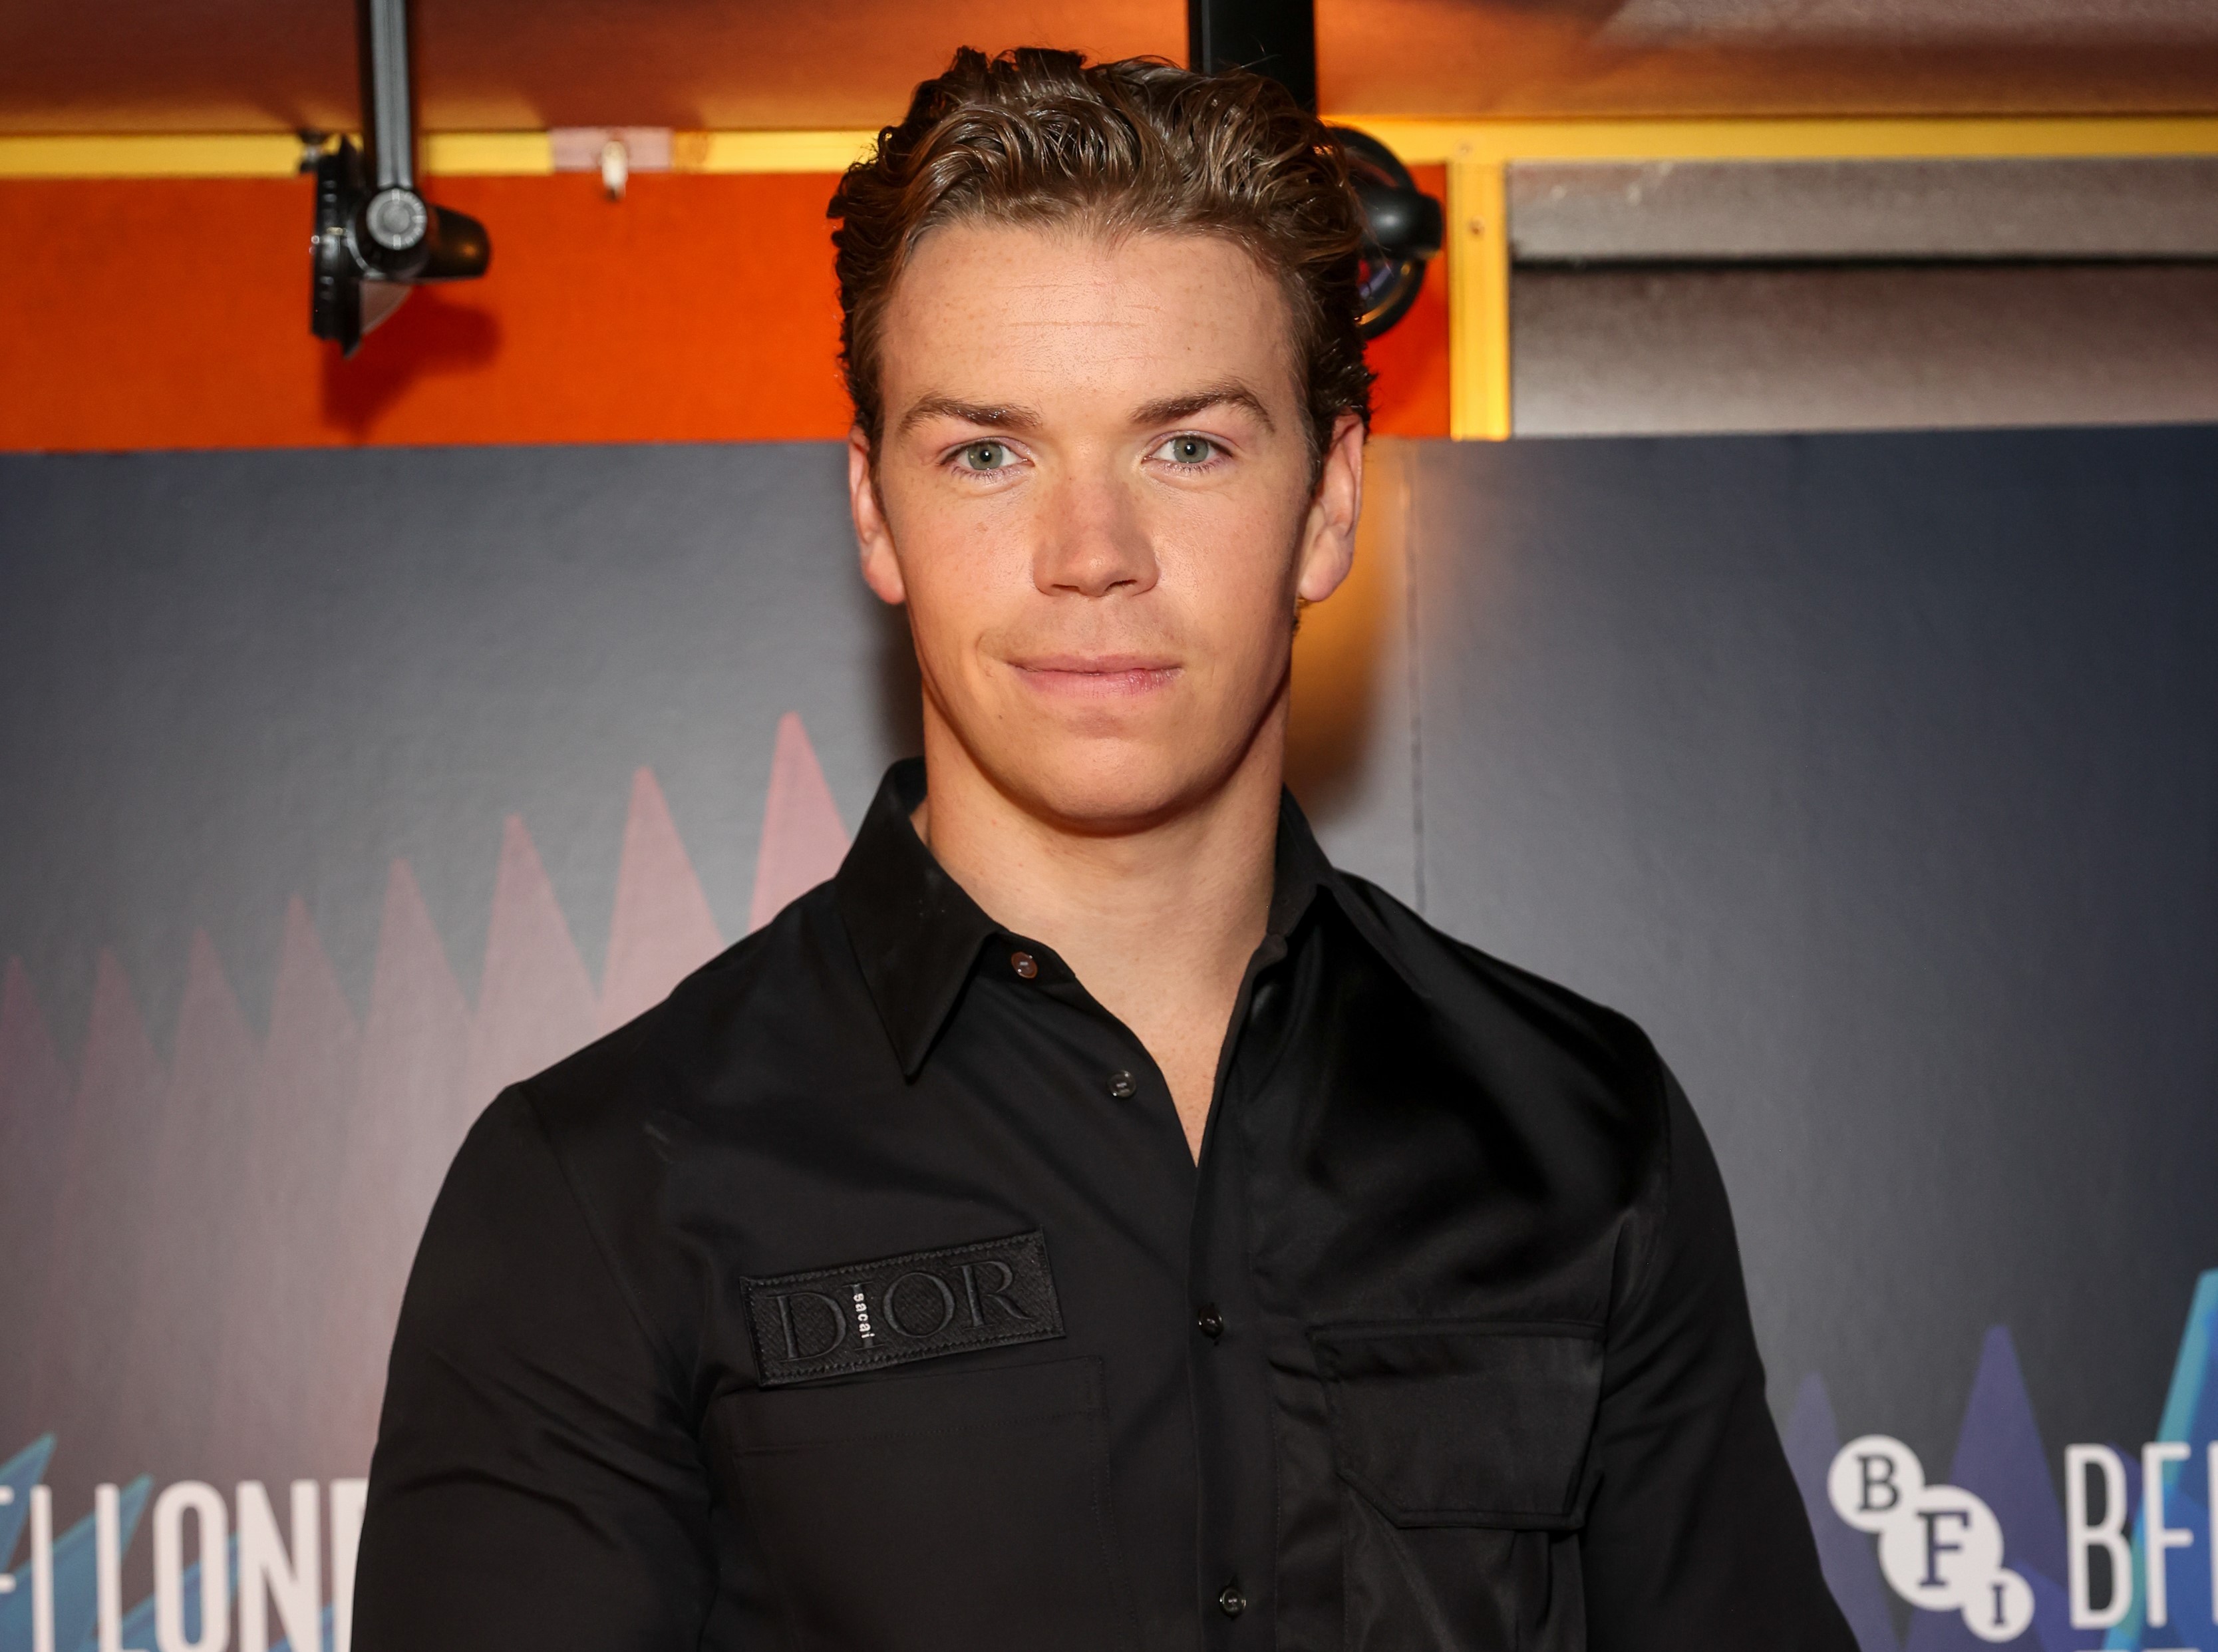 LONDON, ENGLAND - OCTOBER 13:   Will Poulter attends the European Premiere of Disney+'s 'Dopesick' on October 13, 2021 in London, England. (Photo by David M. Benett/Dave Benett/Getty Images for Disney+) (Foto: Dave Benett/Getty Images for Dis)